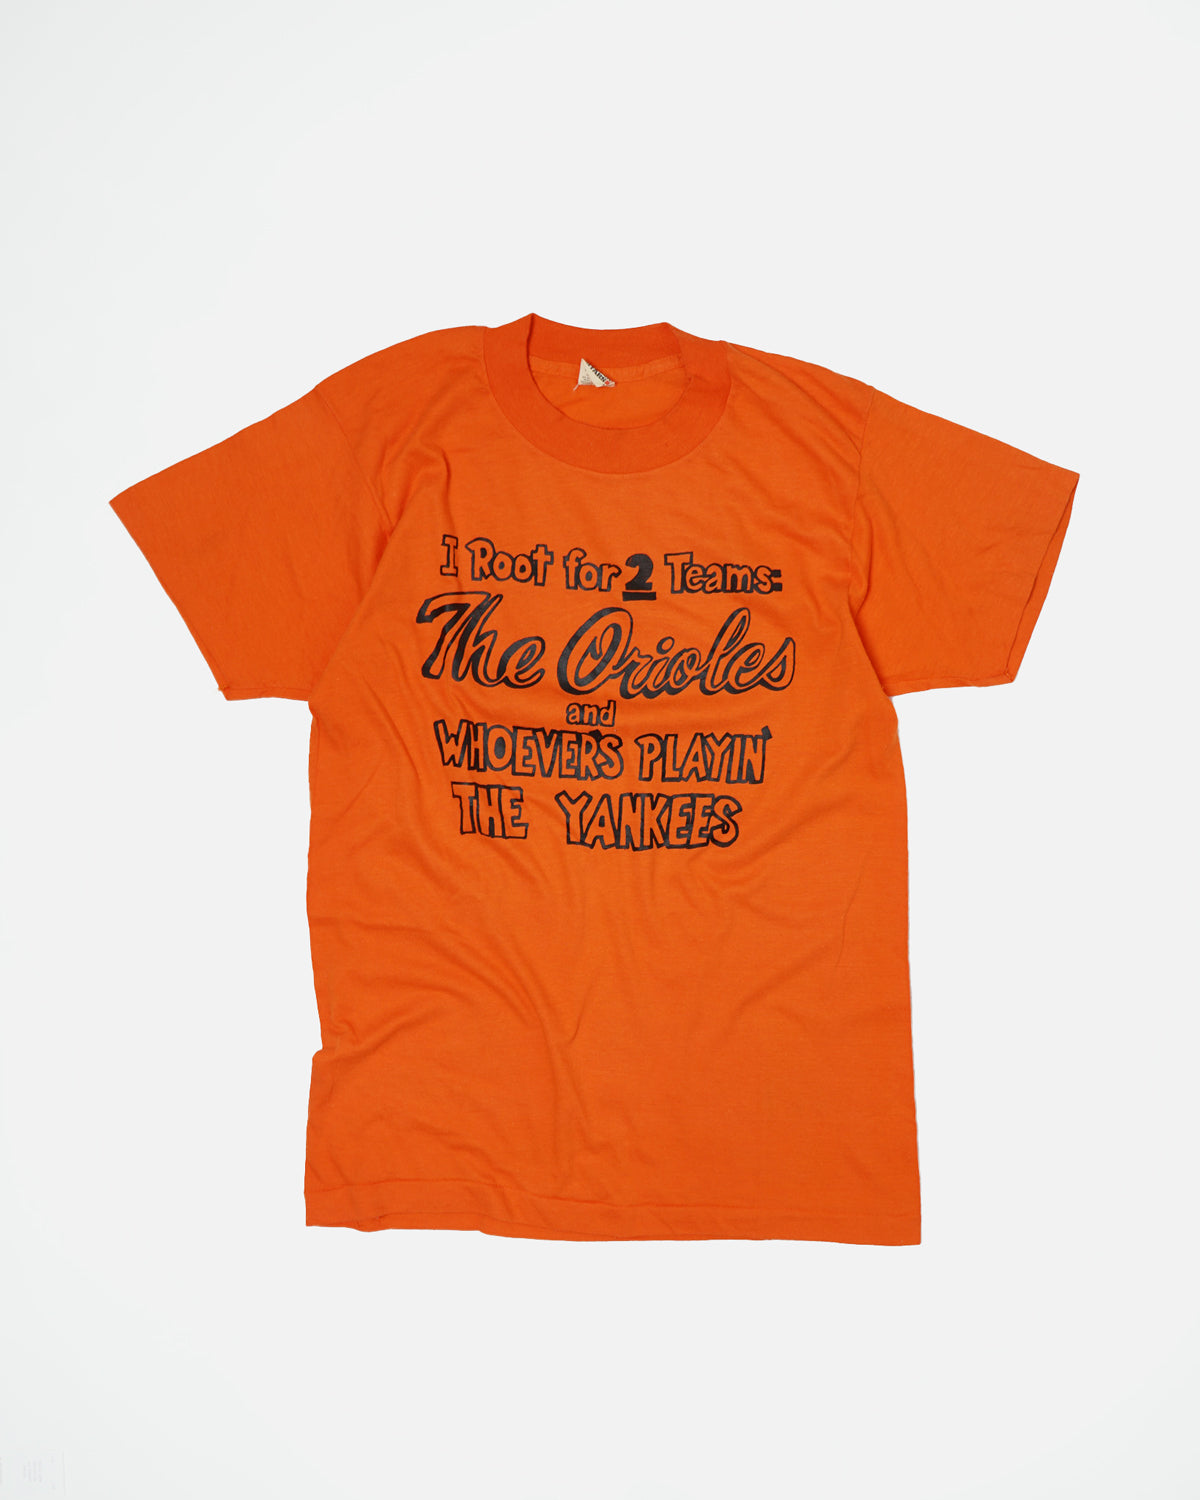 Graphic Tee / The Orioles and Whoevers Playin' the Yankees